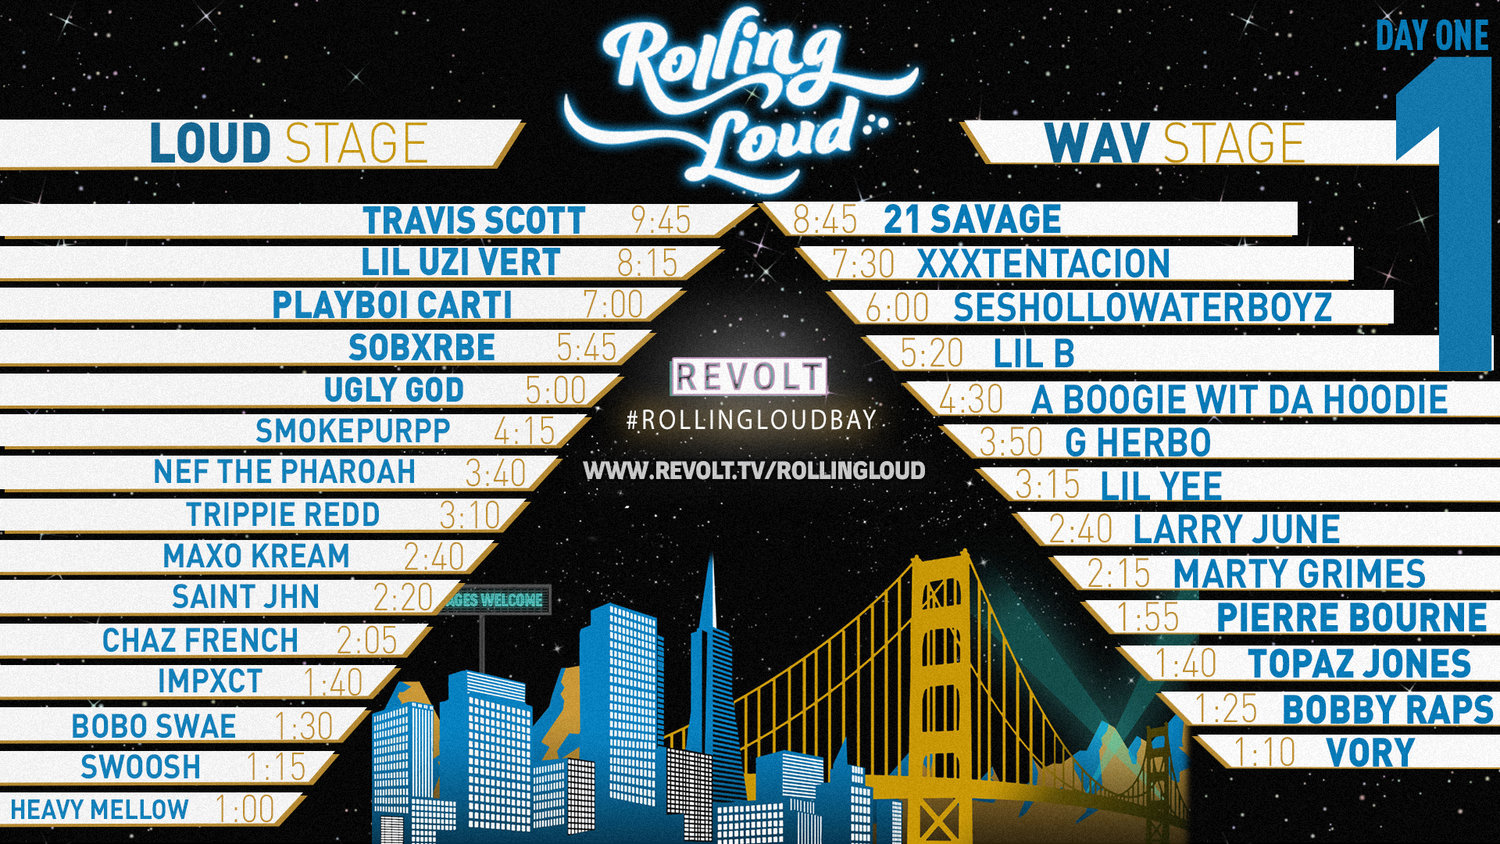 Watch Day 1 Live Stream of Rolling Loud Bay Area Festival | HipHop-N-More1500 x 844